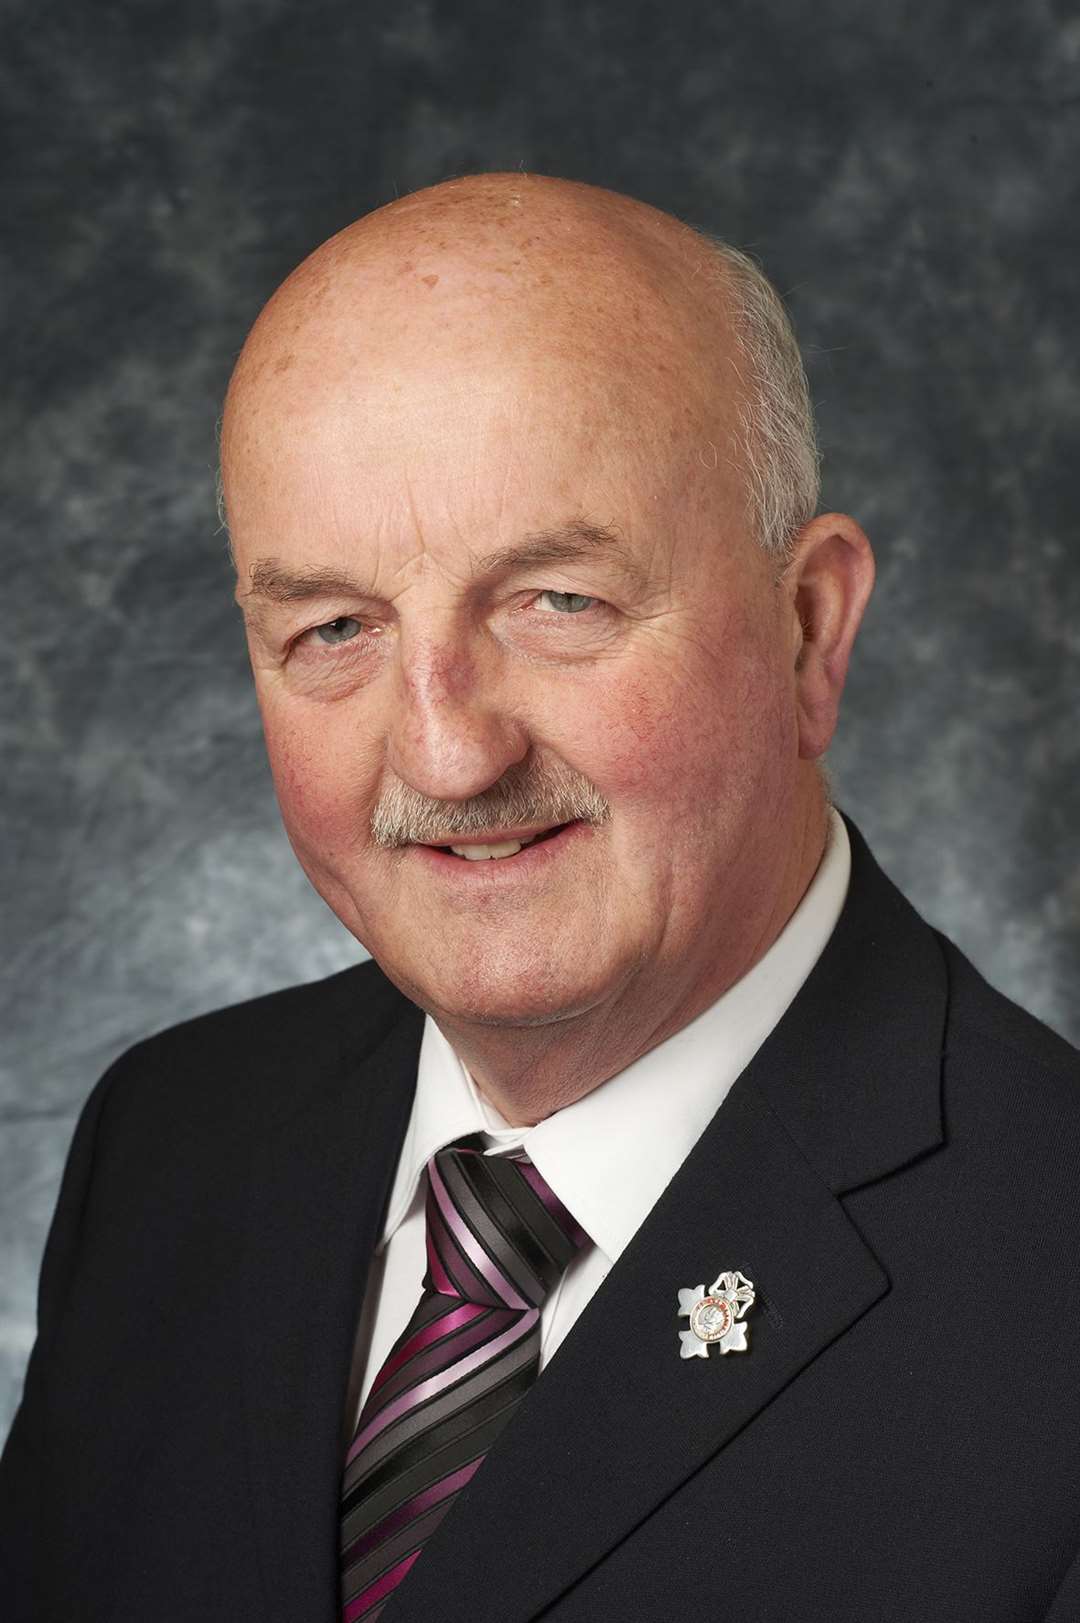 Councillor Willie Mackay says he is prepared to speak to anyone with concerns in Dunnett Avenue or elsewhere.